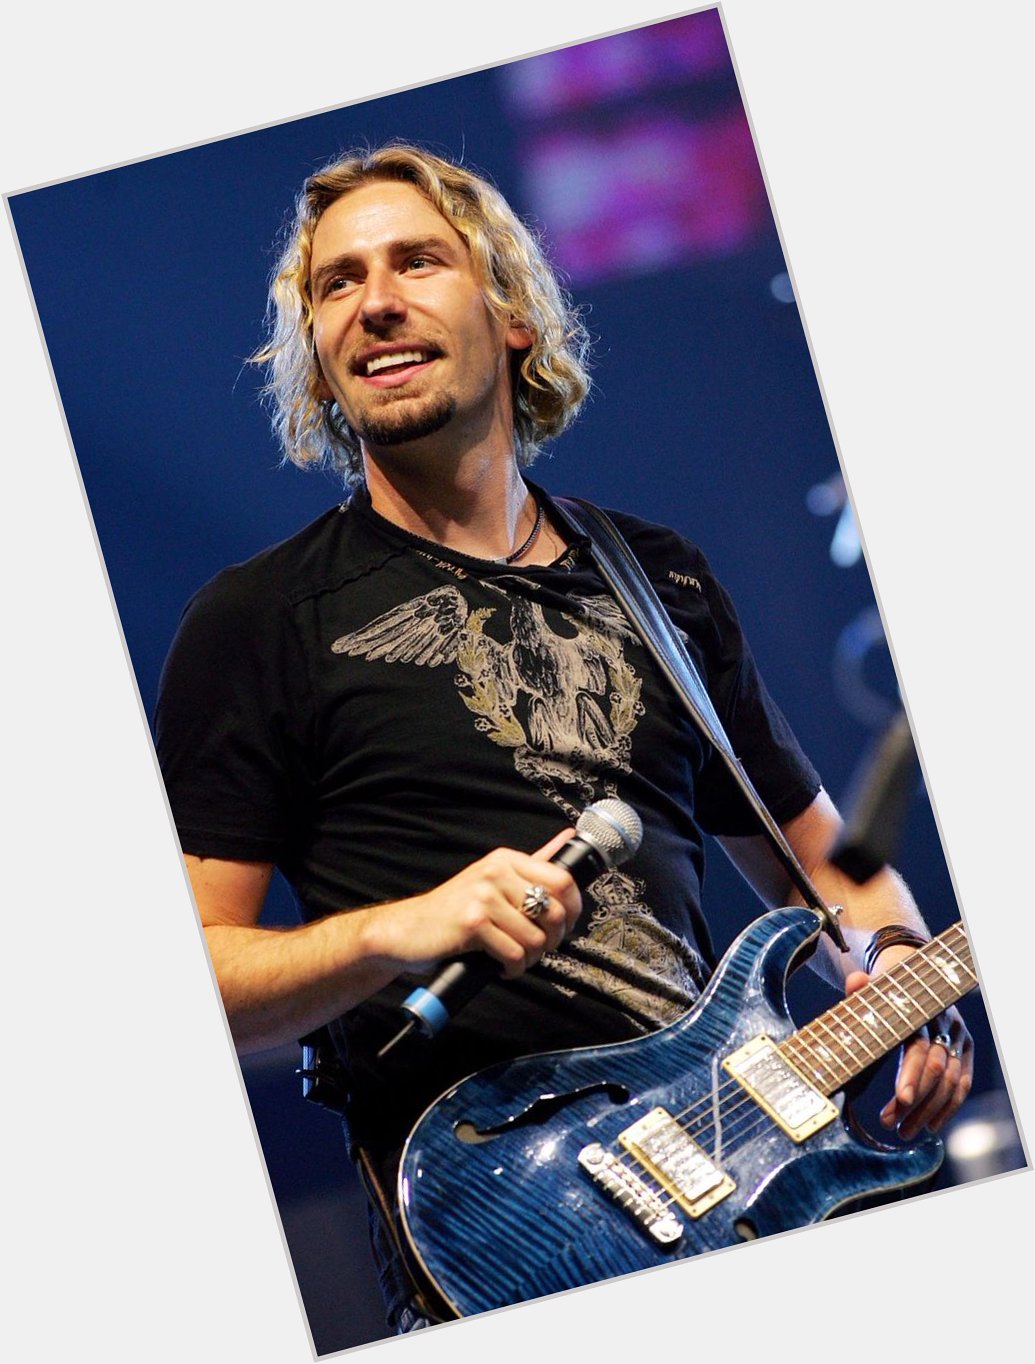 Happy Birthday to Chad Kroeger, 48 today 